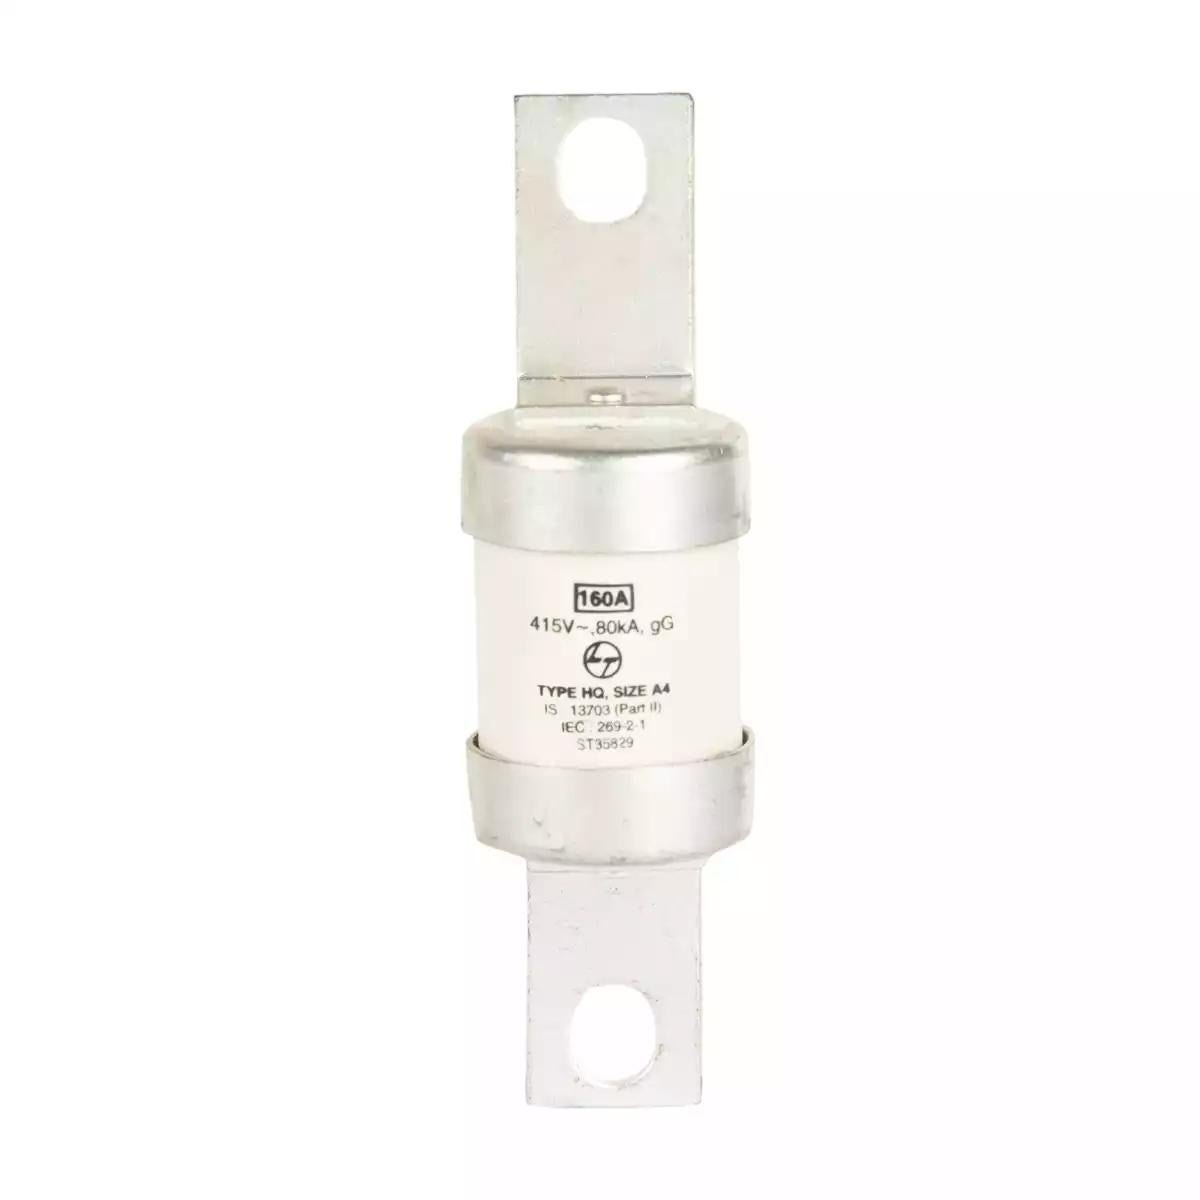 HQ Bolted HRC fuse 125A 415V AC Size A4